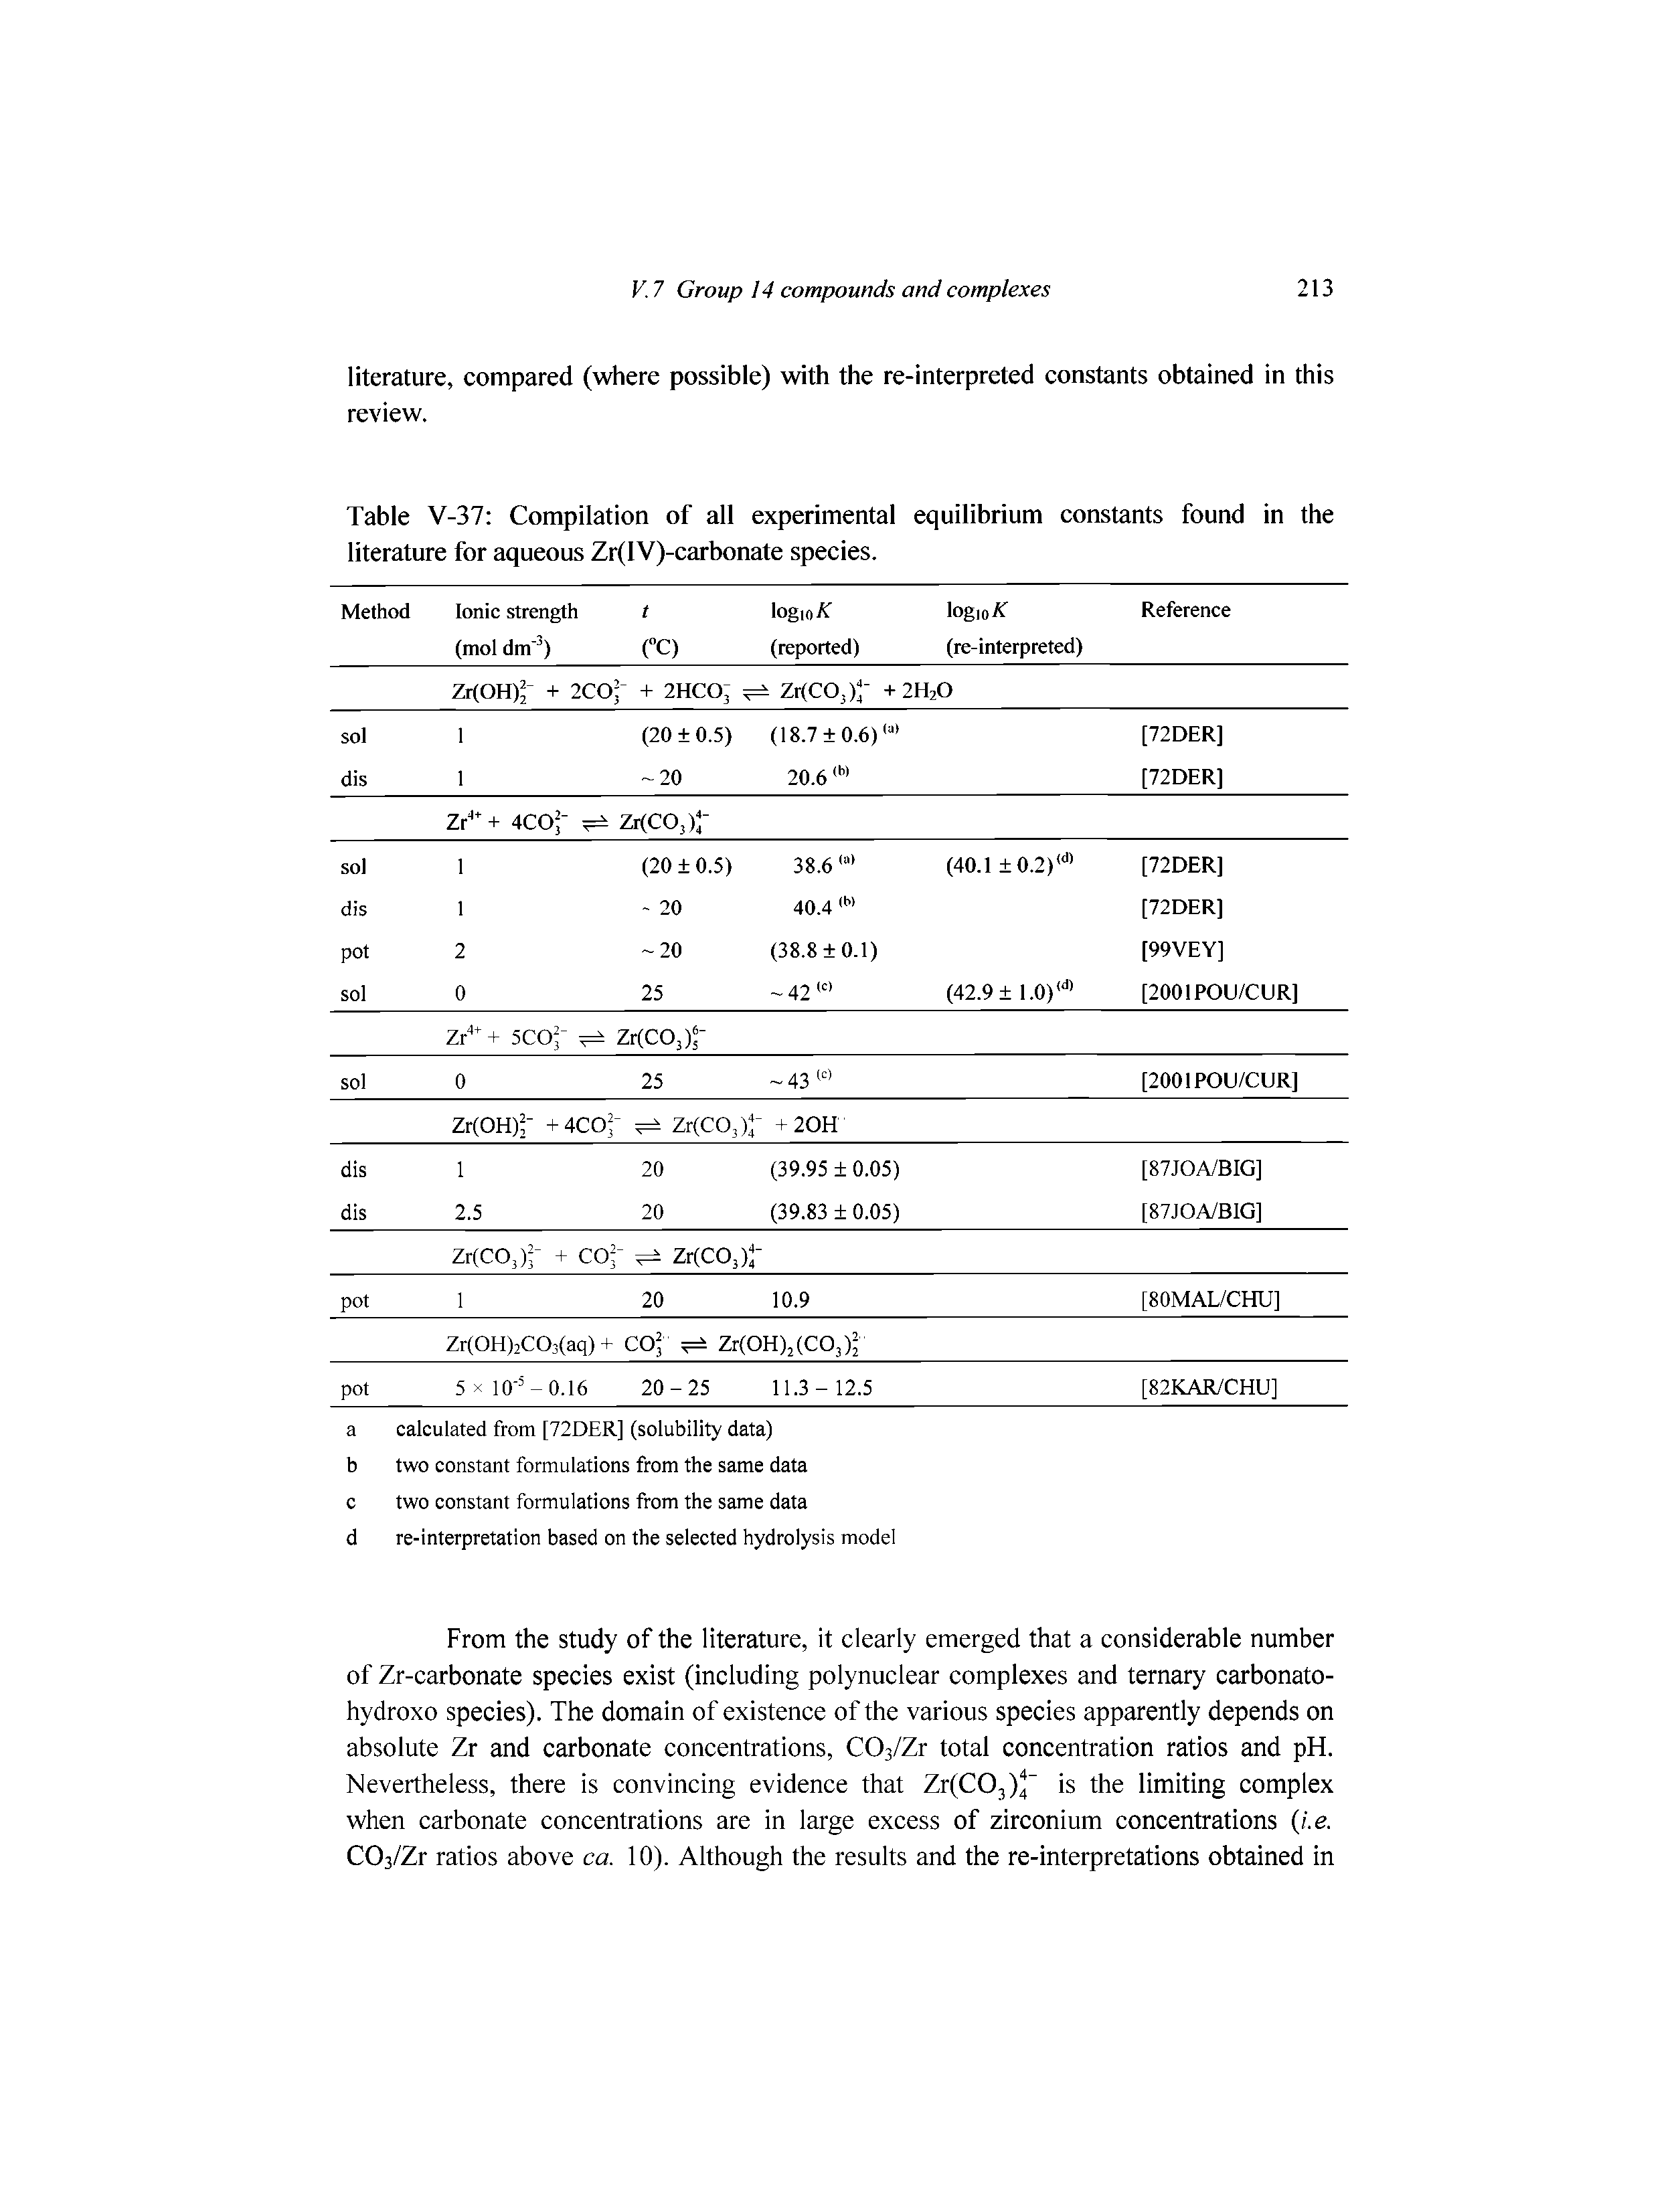 Table V-37 Compilation of all experimental equilibrium constants found in the literature for aqueous Zr(IV)-carbonate species.